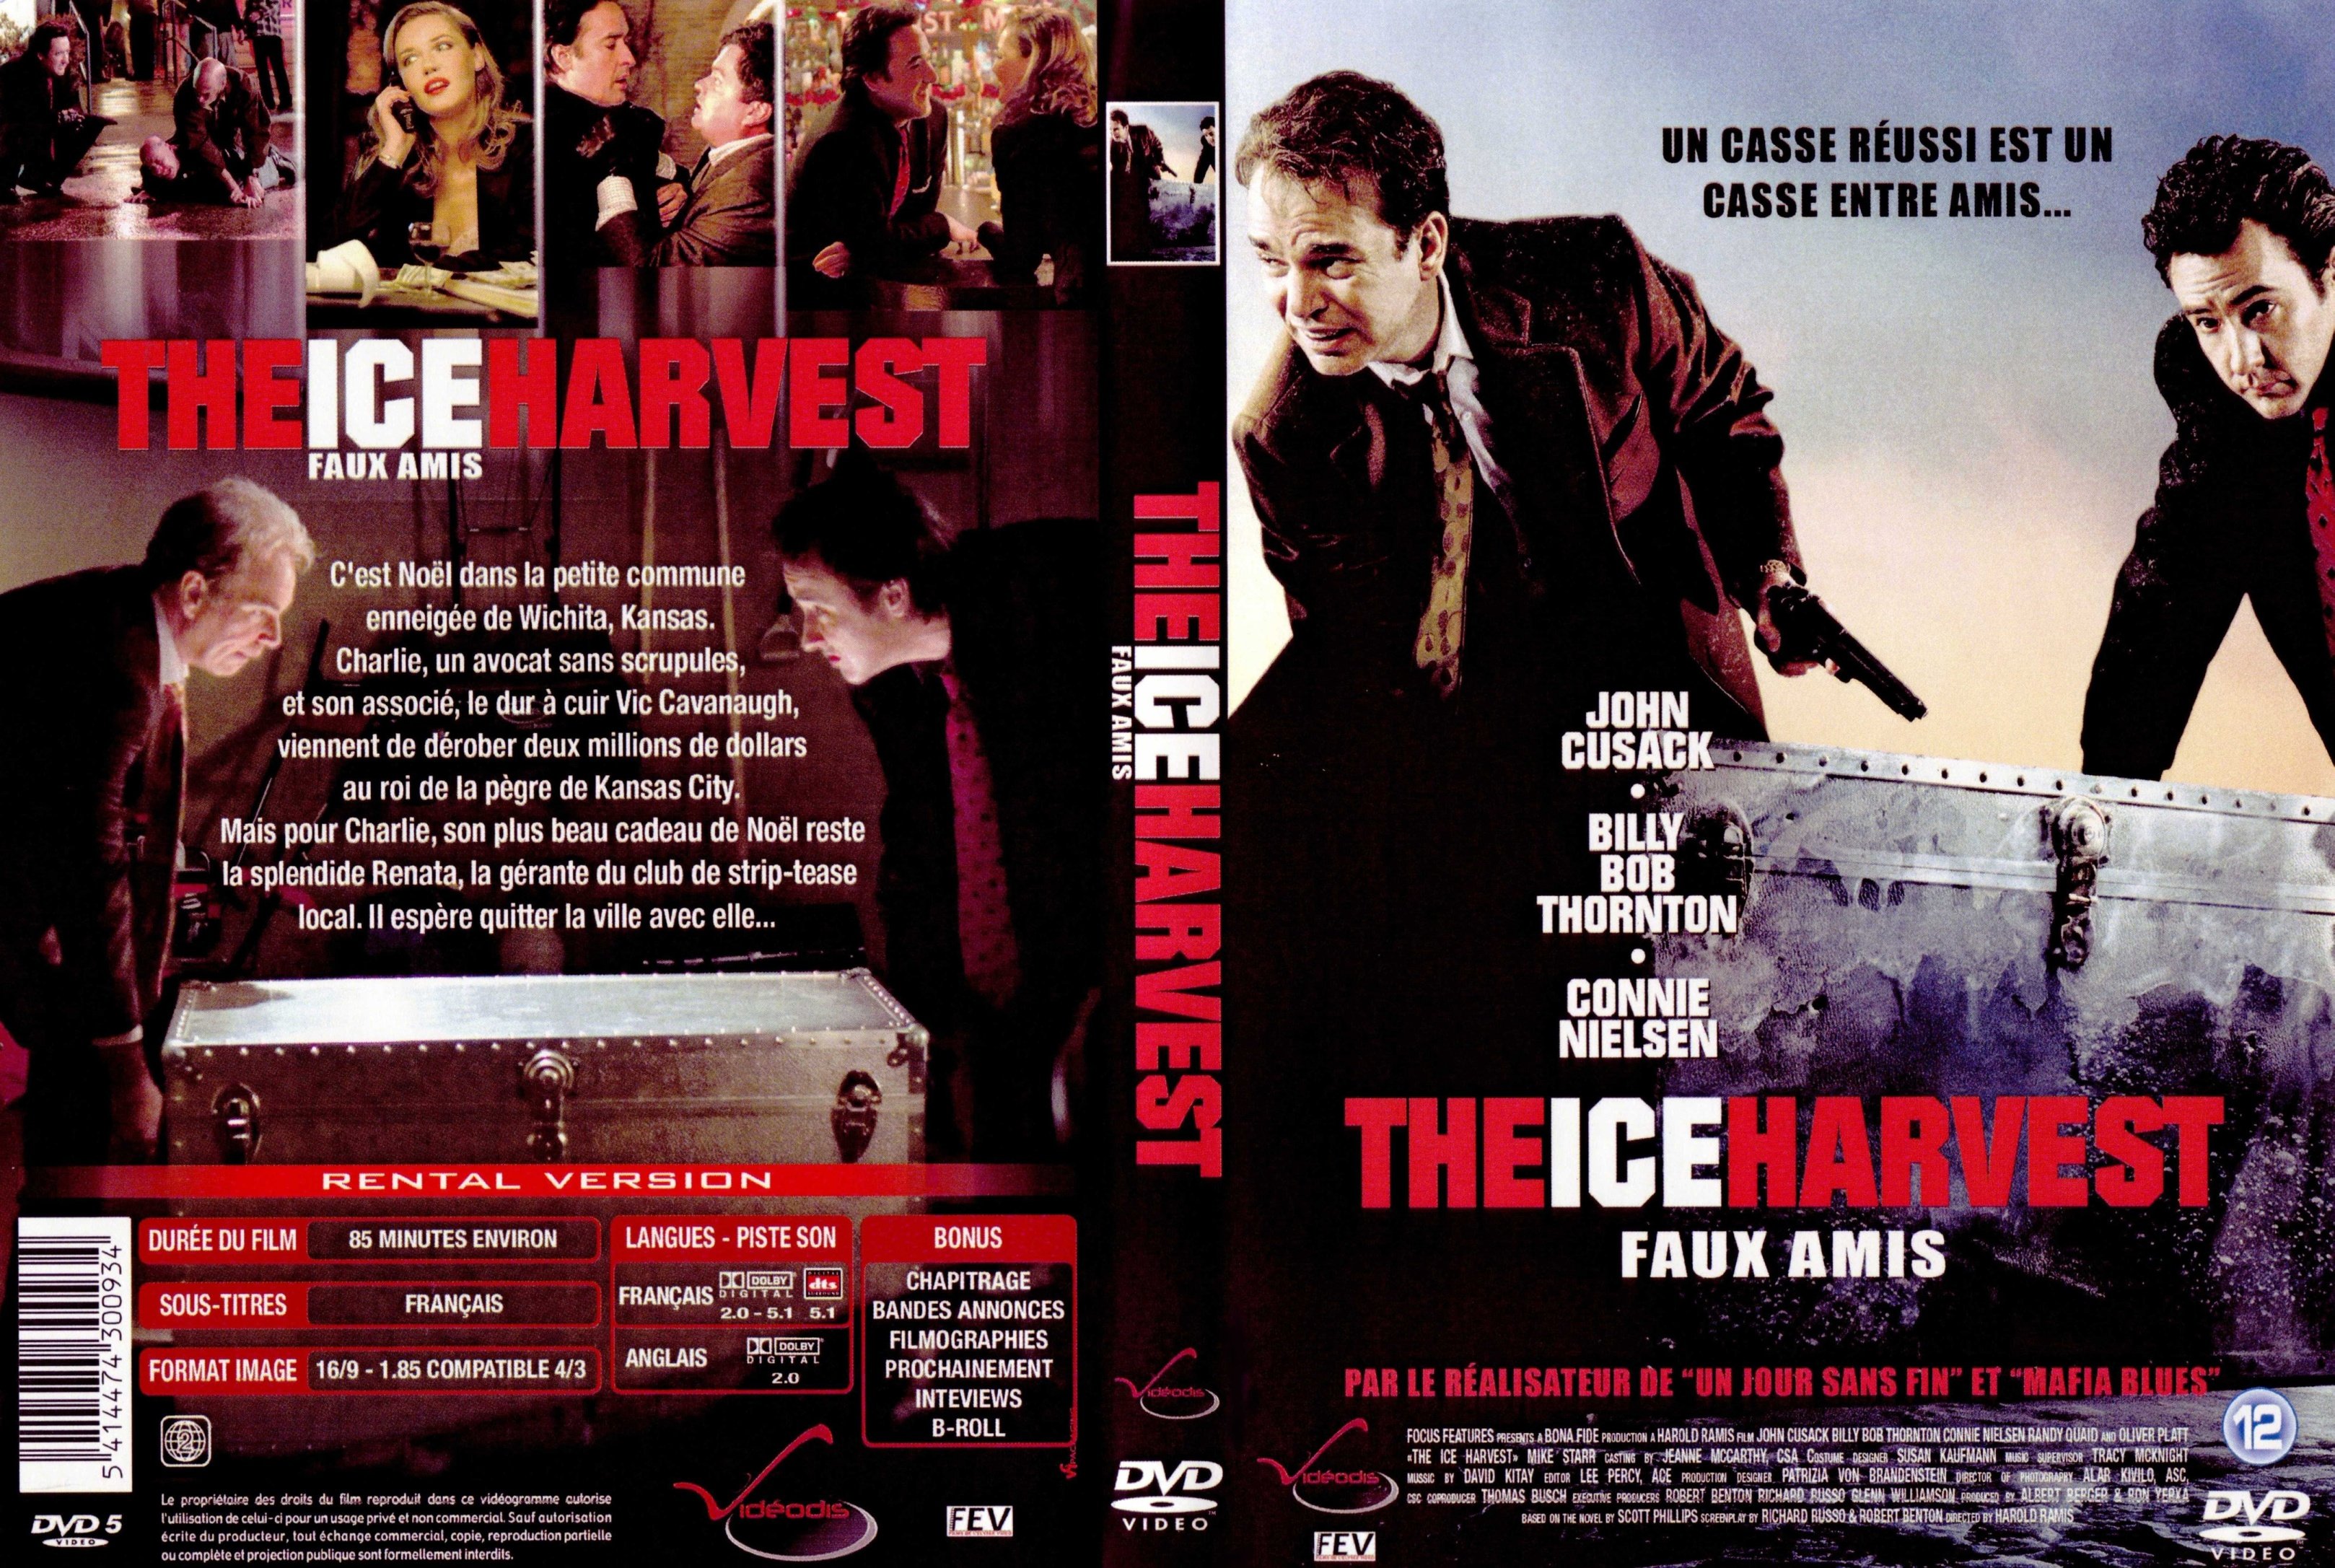 Jaquette DVD The ice harvest